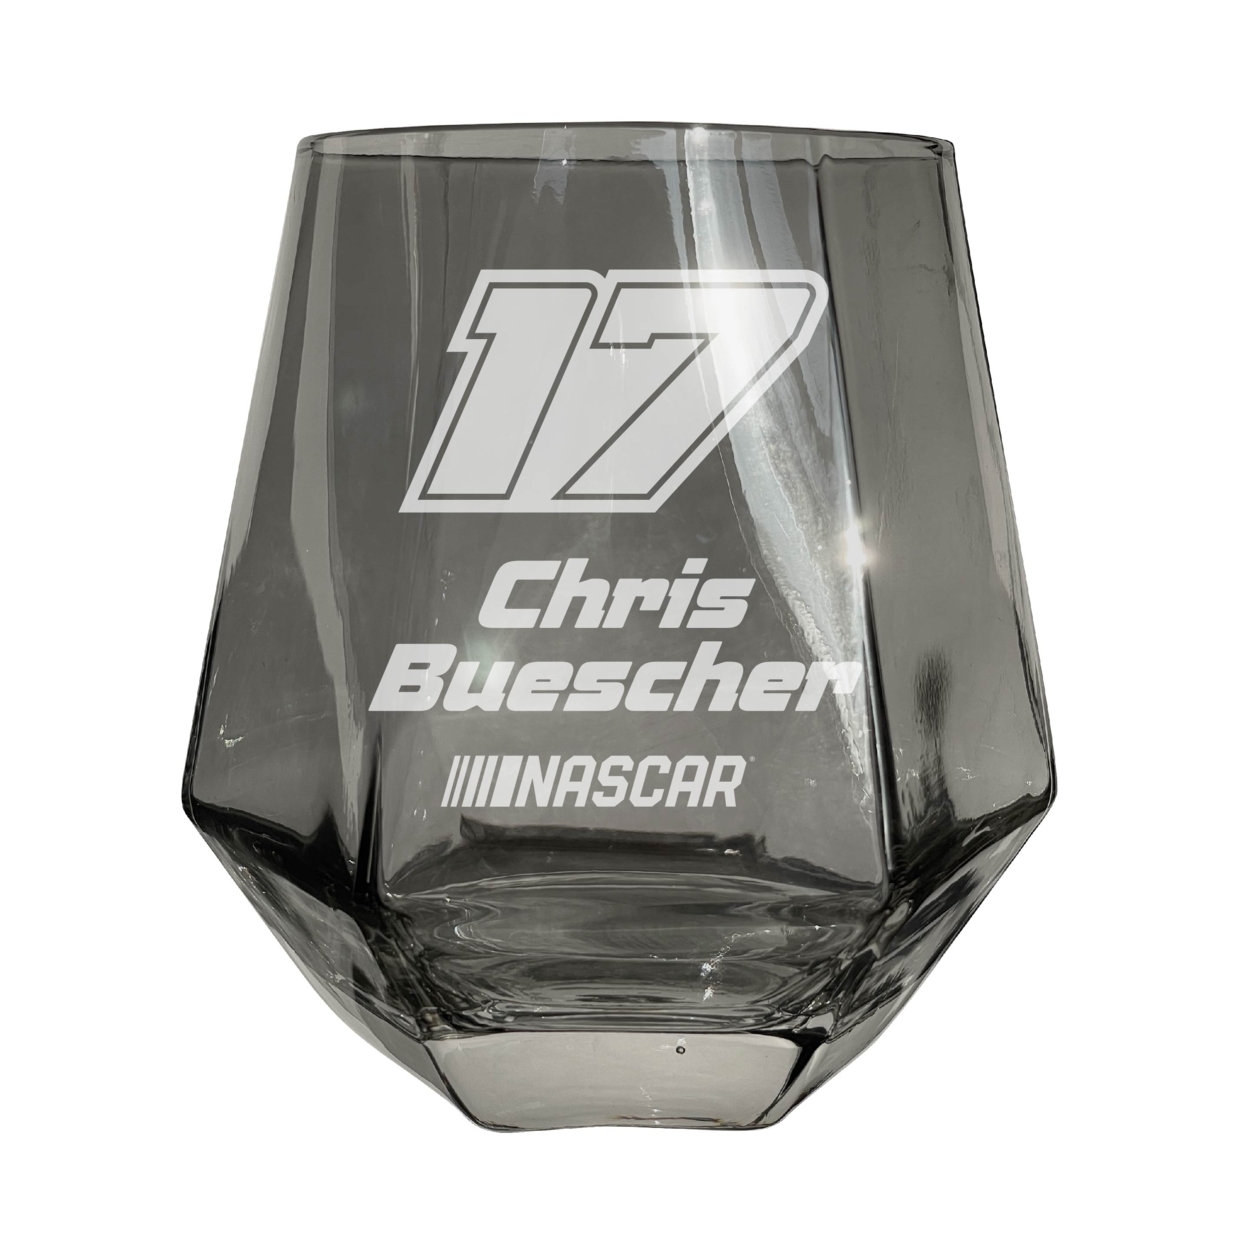 #17 Chris Buescher Officially Licensed 10 Oz Engraved Diamond Wine Glass - Grey, 2-Pack